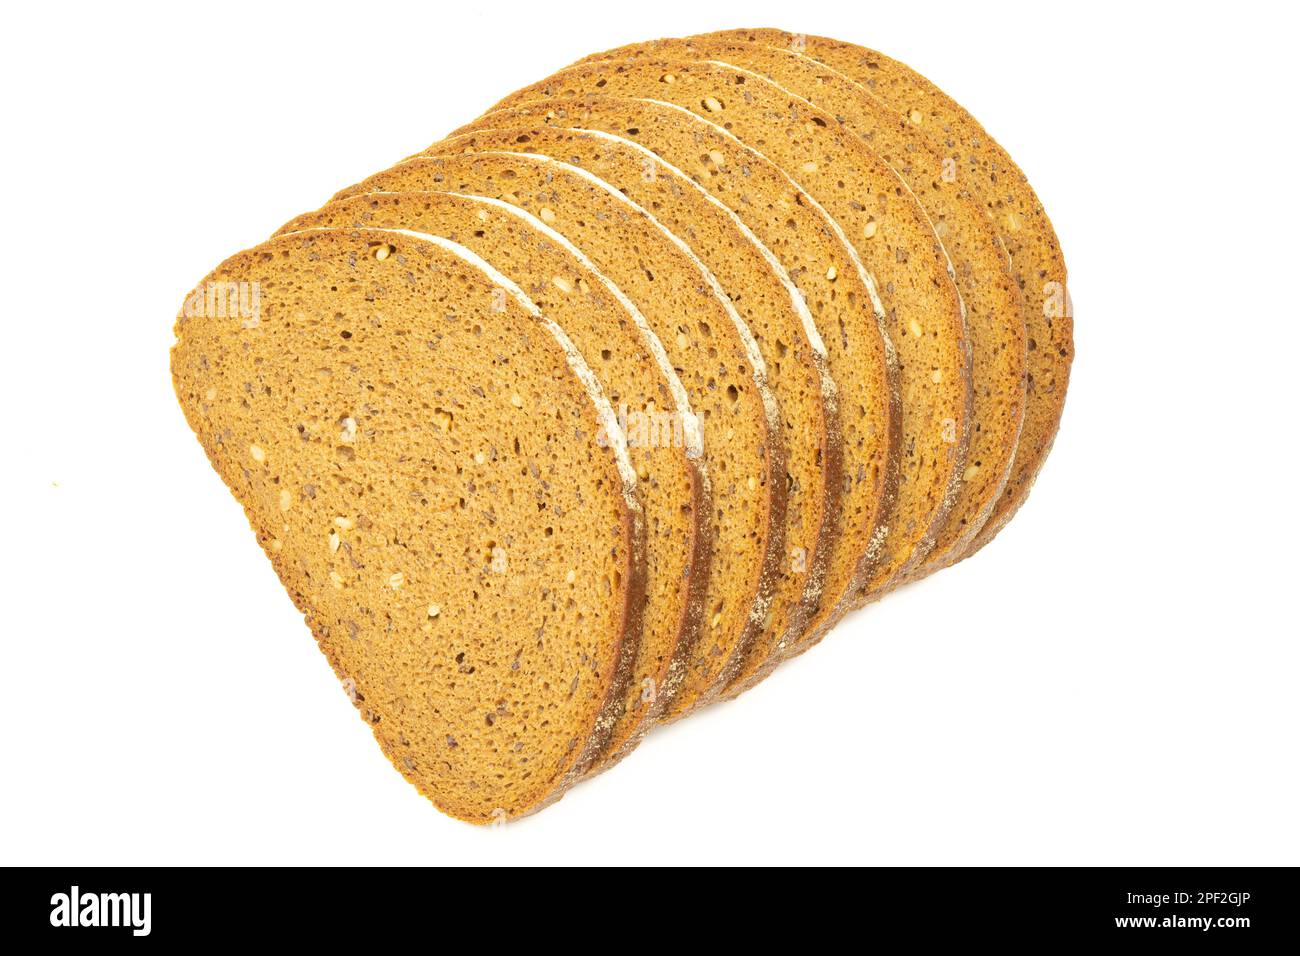 Stack of diet multigrain bread slices isolated on white background Stock Photo